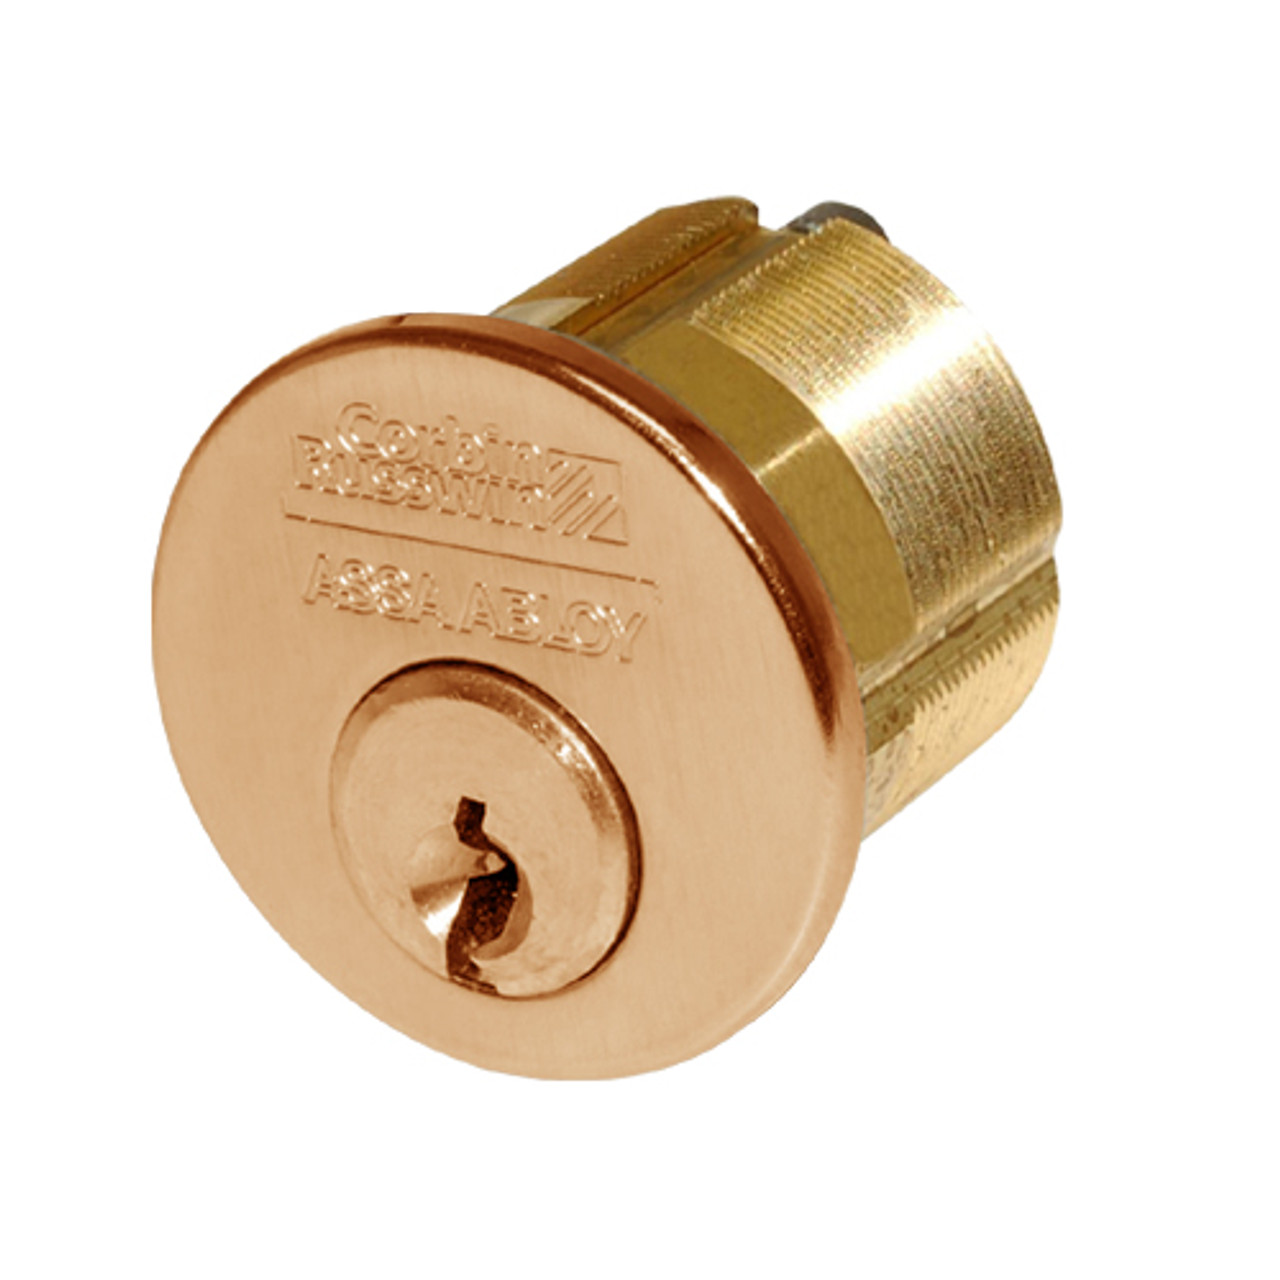 CR1000-118-A01-6-59A2-612 Corbin Conventional Mortise Cylinder for Mortise Lock and DL3000 Deadlocks with Cloverleaf Cam in Satin Bronze Finish